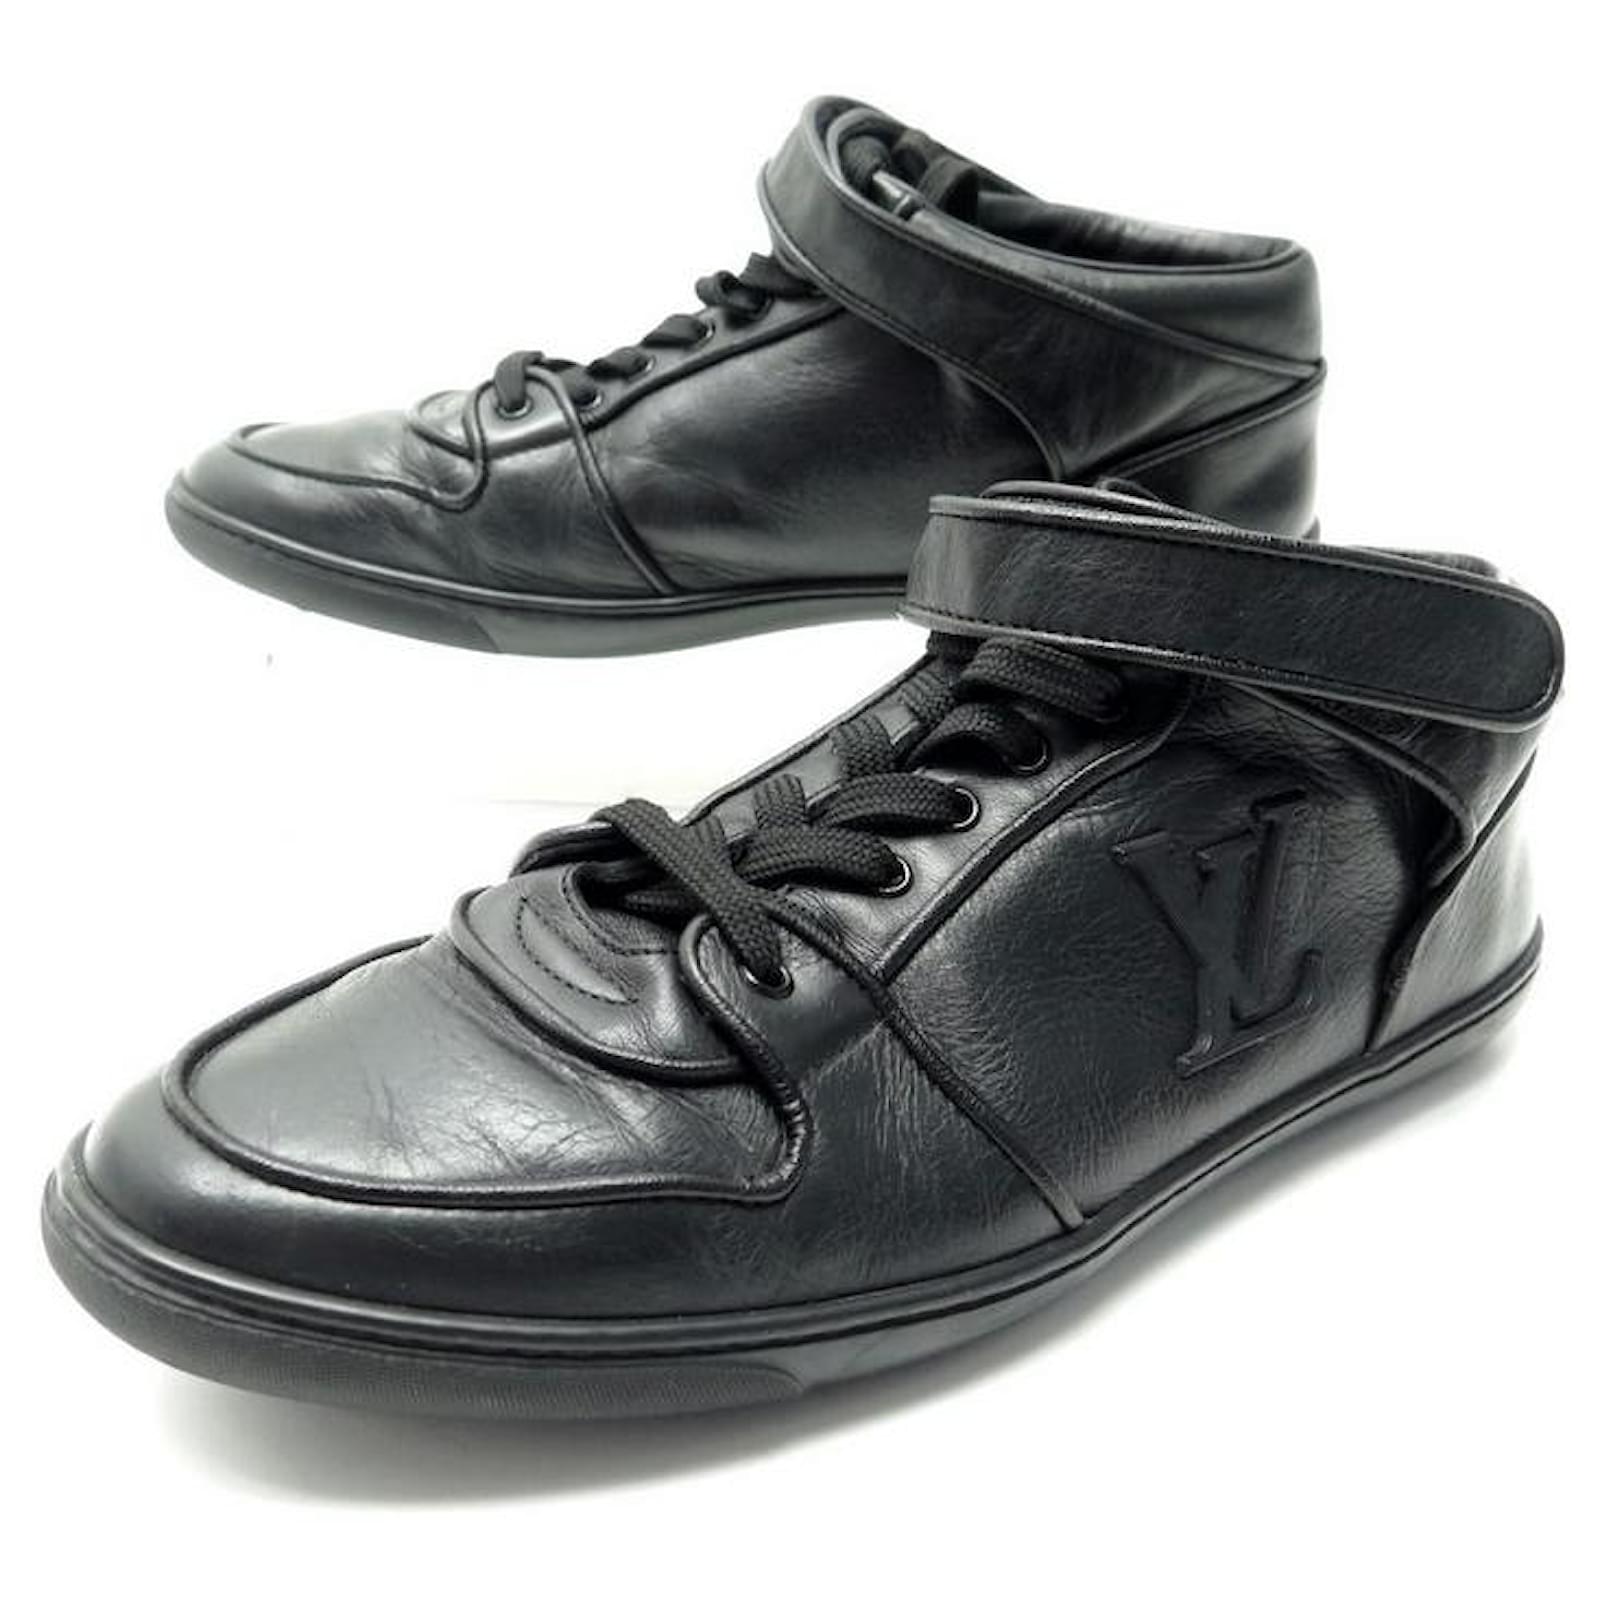 LOUIS VUITTON sneakers SHOES 38.5 ACAPULCO LEATHER BLACK SNEAKERS